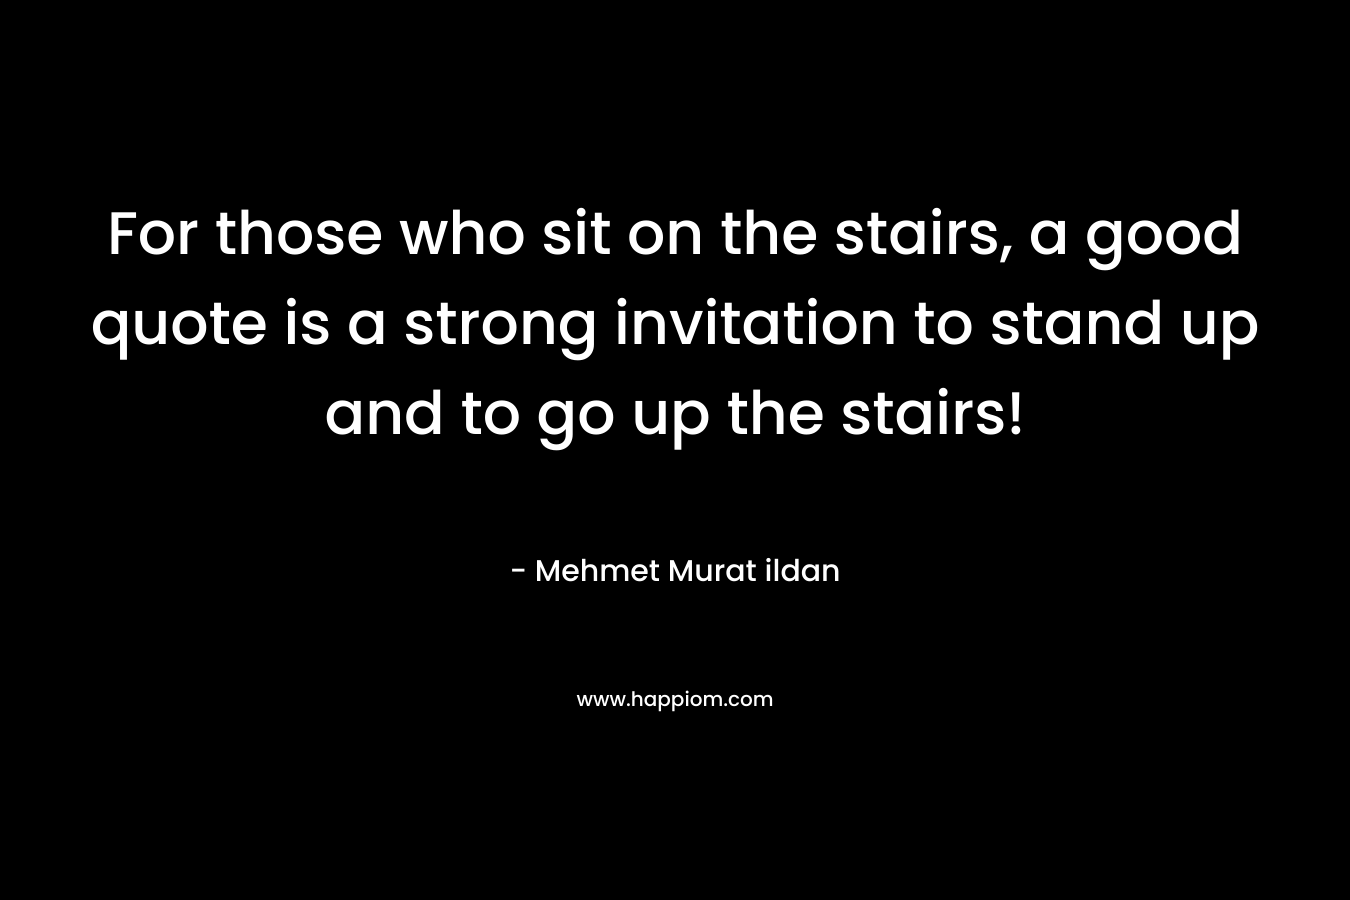 For those who sit on the stairs, a good quote is a strong invitation to stand up and to go up the stairs!